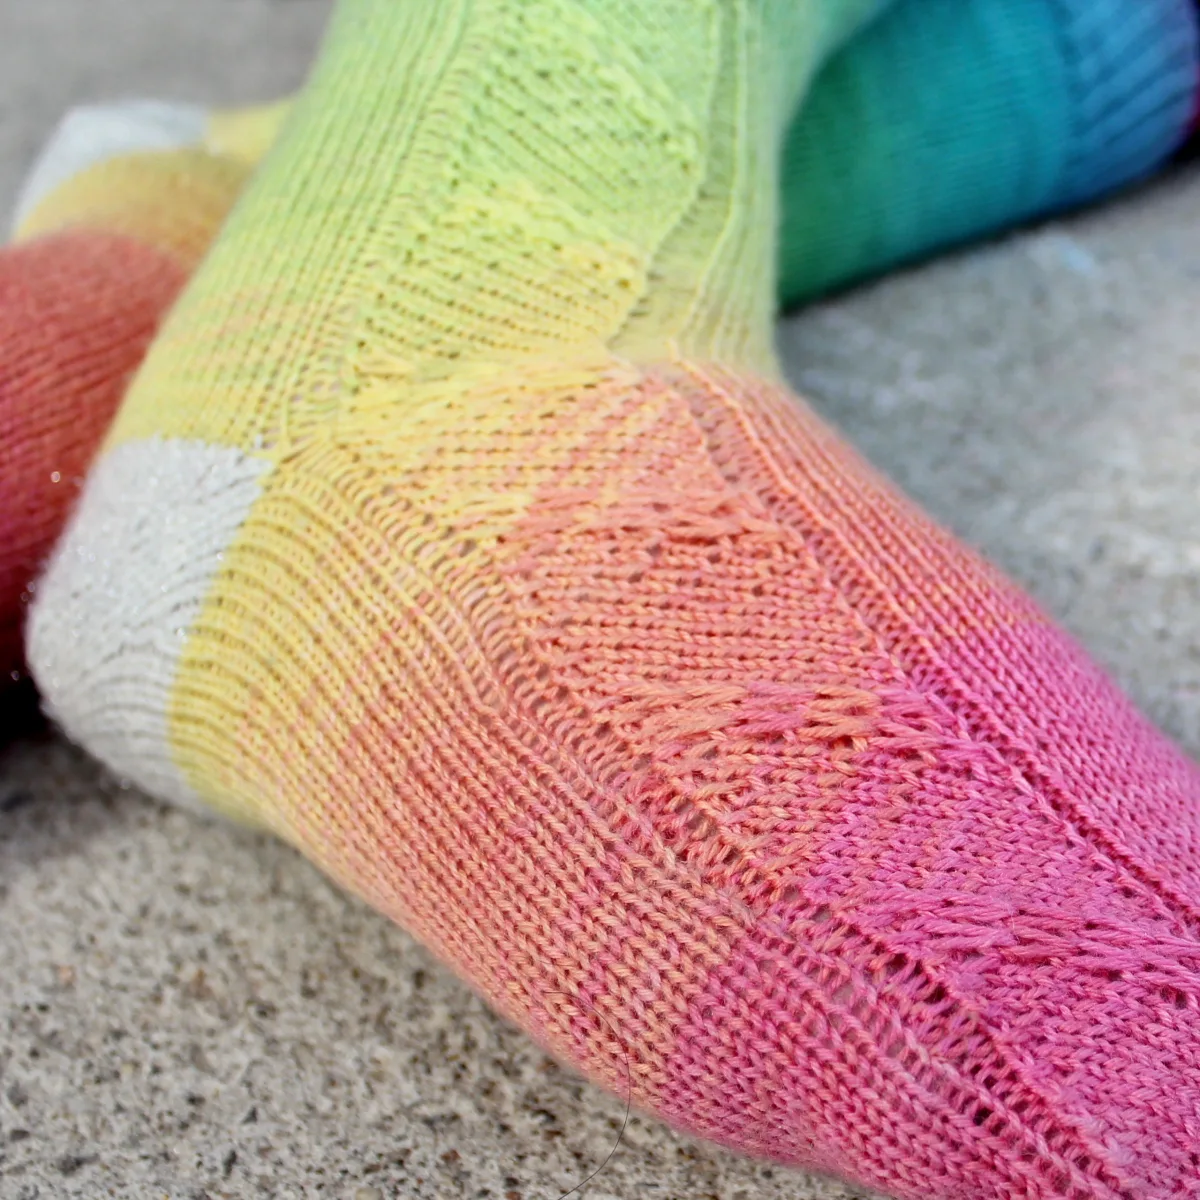 Closeup of feet wearing rainbow socks with diagonal slipped-stitch panel and sparkly white heels.